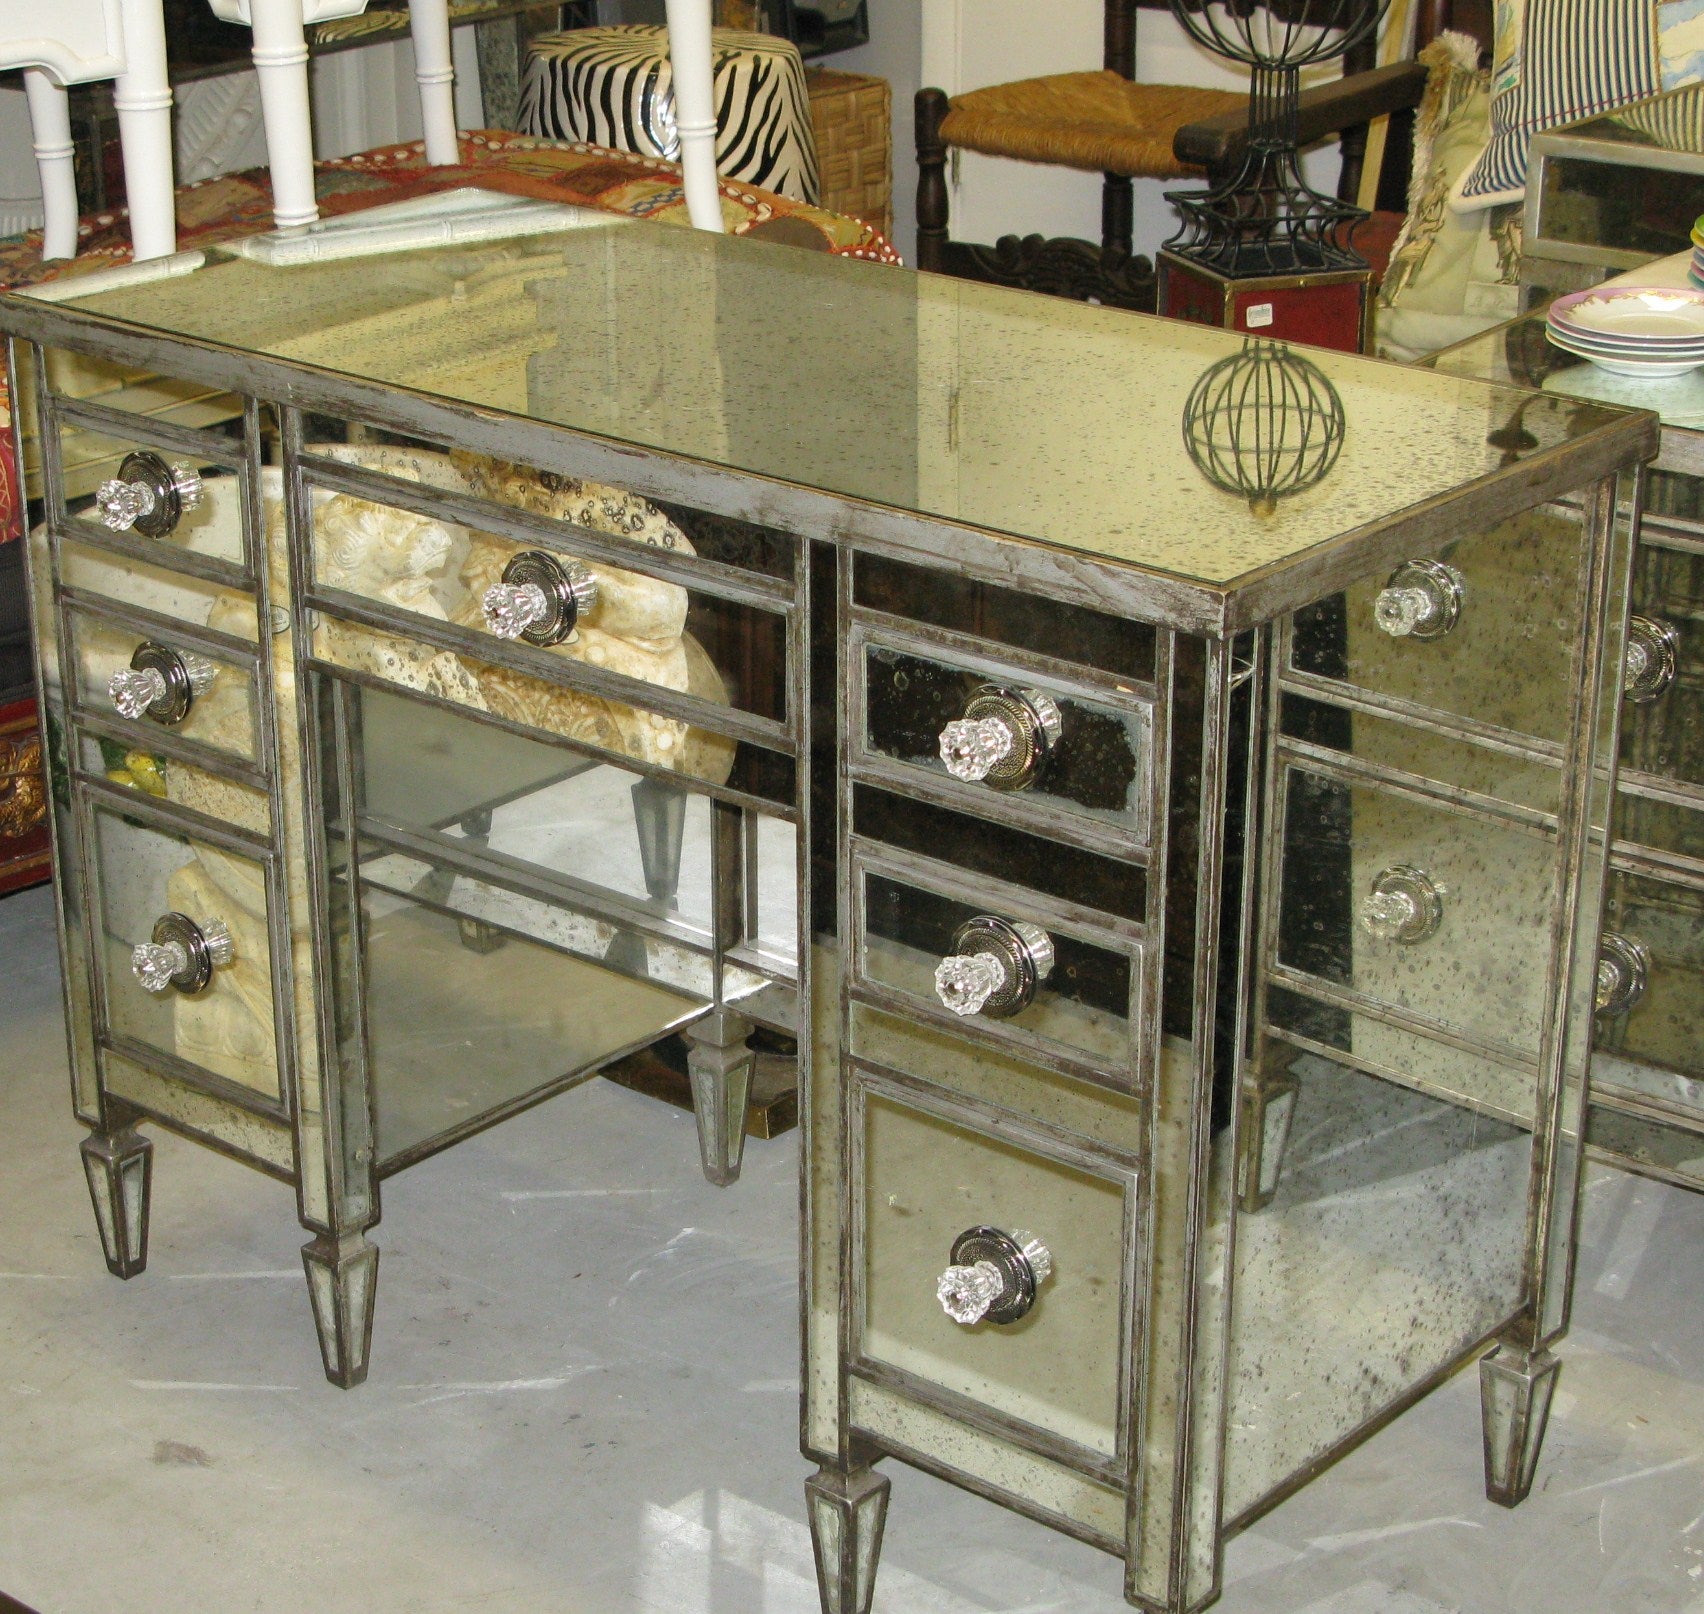 Circa 1940's Mirrored Dressing Or Desk Table